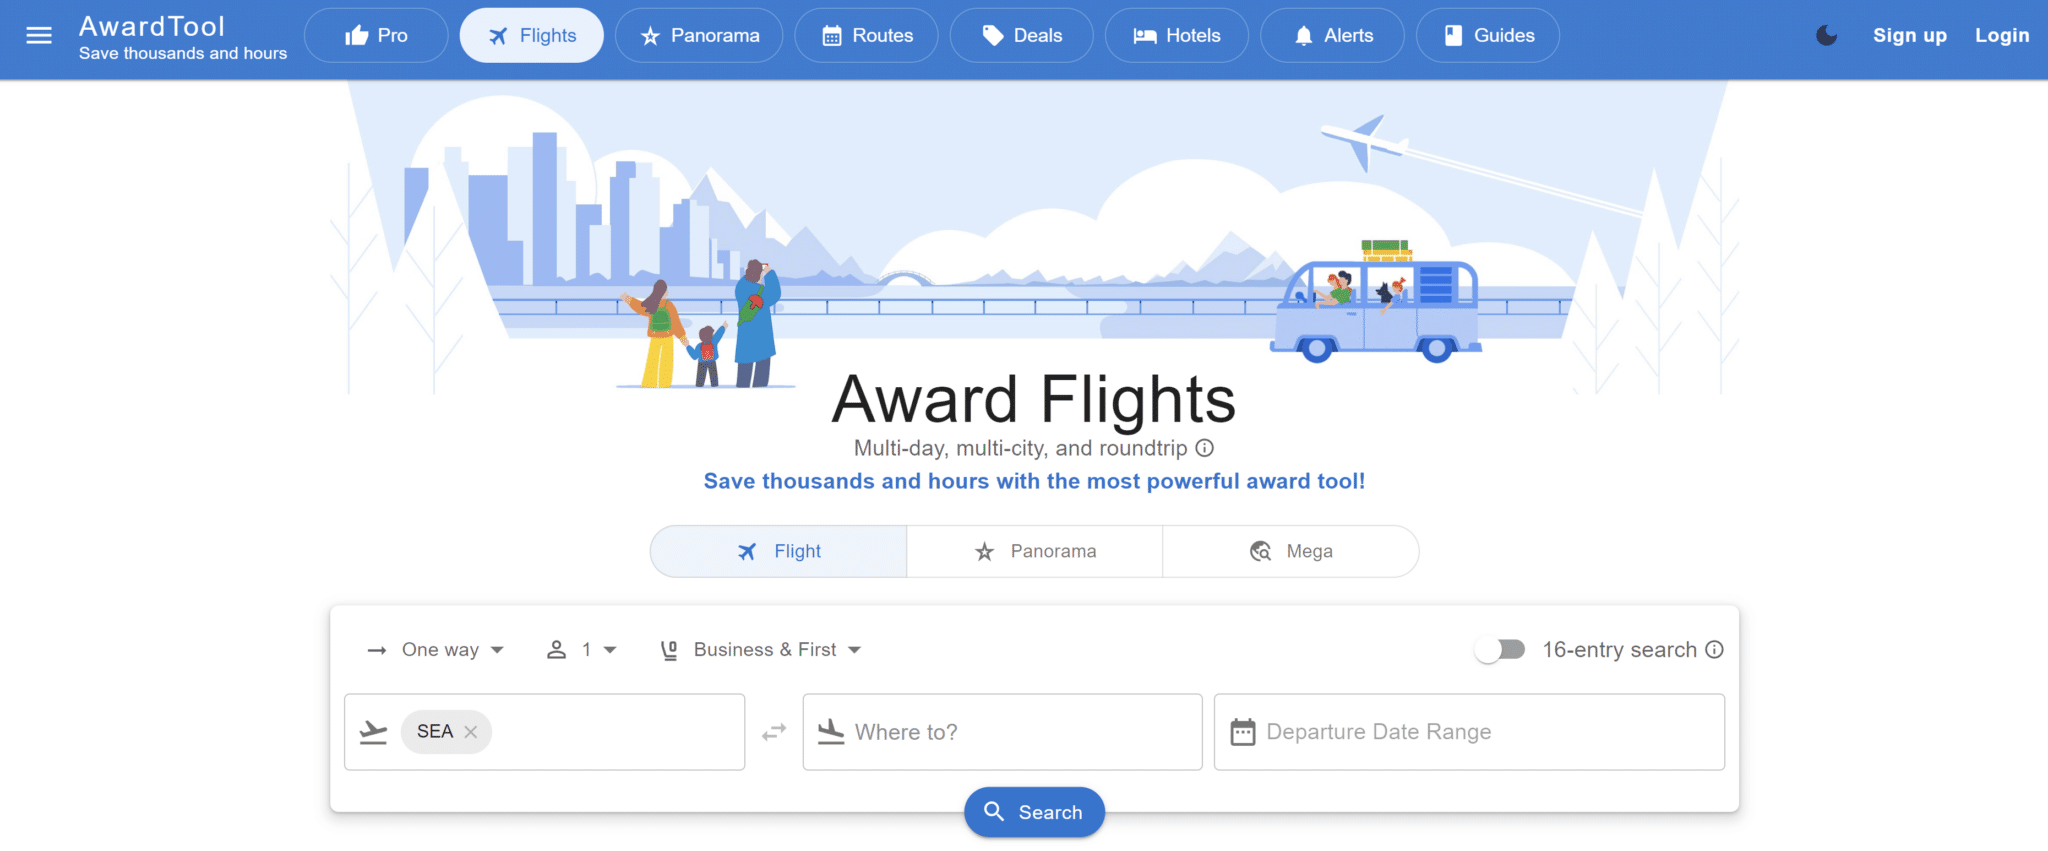 AwardTool flight search in real-time.